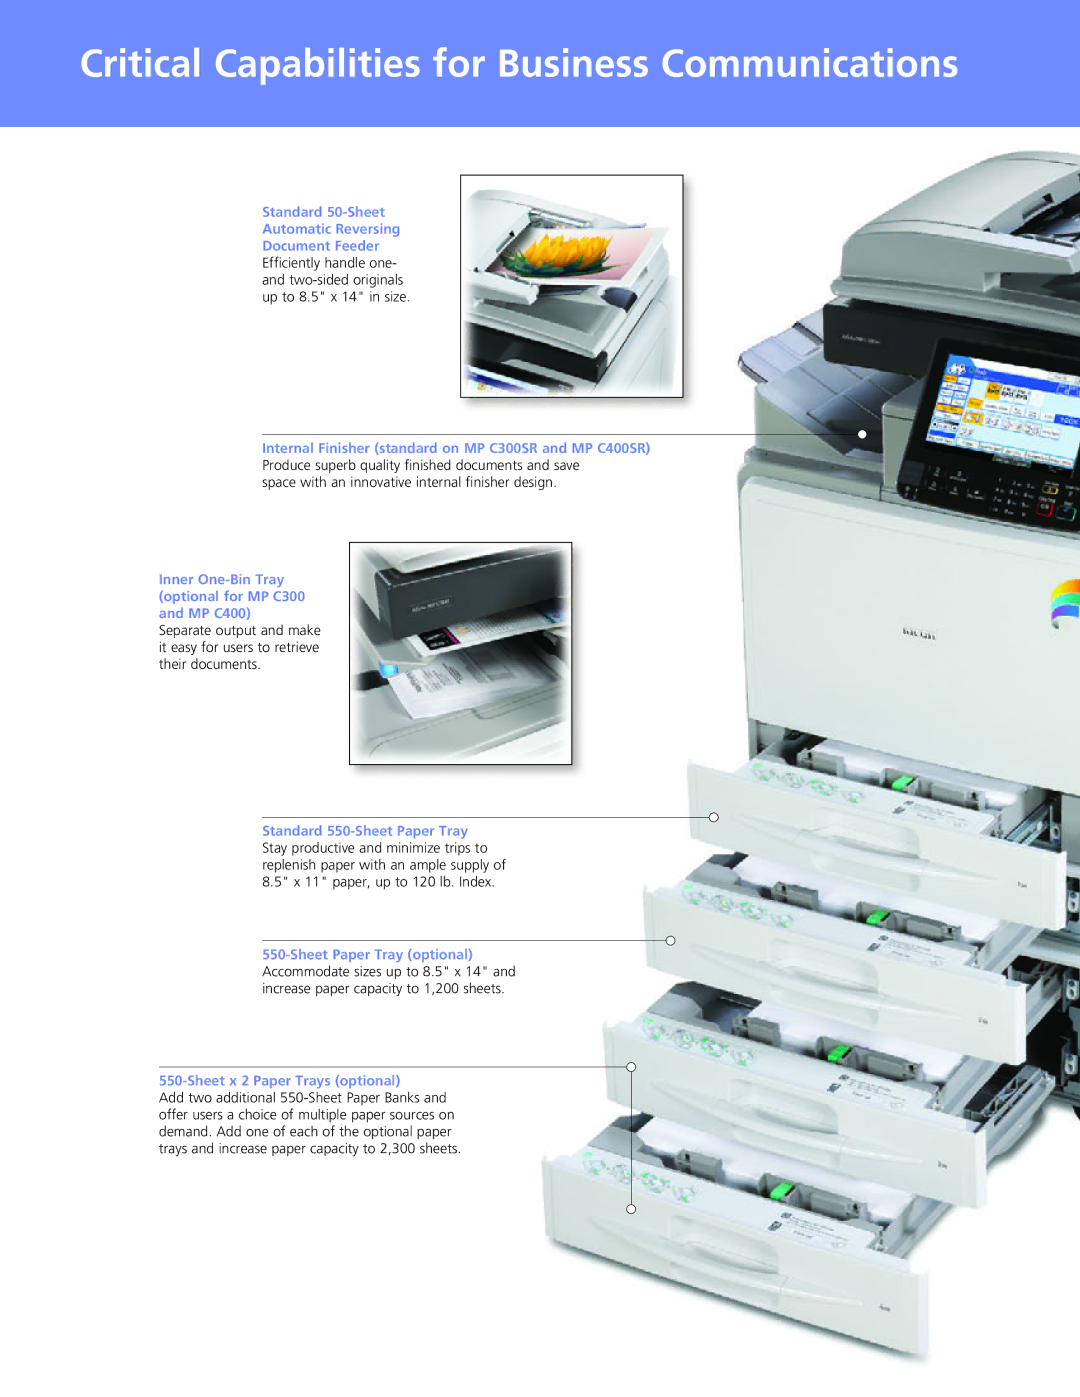 Ricoh MP C300SR, MP C400SR manual Inner One-Bin Tray optional for MP C300 and MP C400, Sheet x 2 Paper Trays optional 